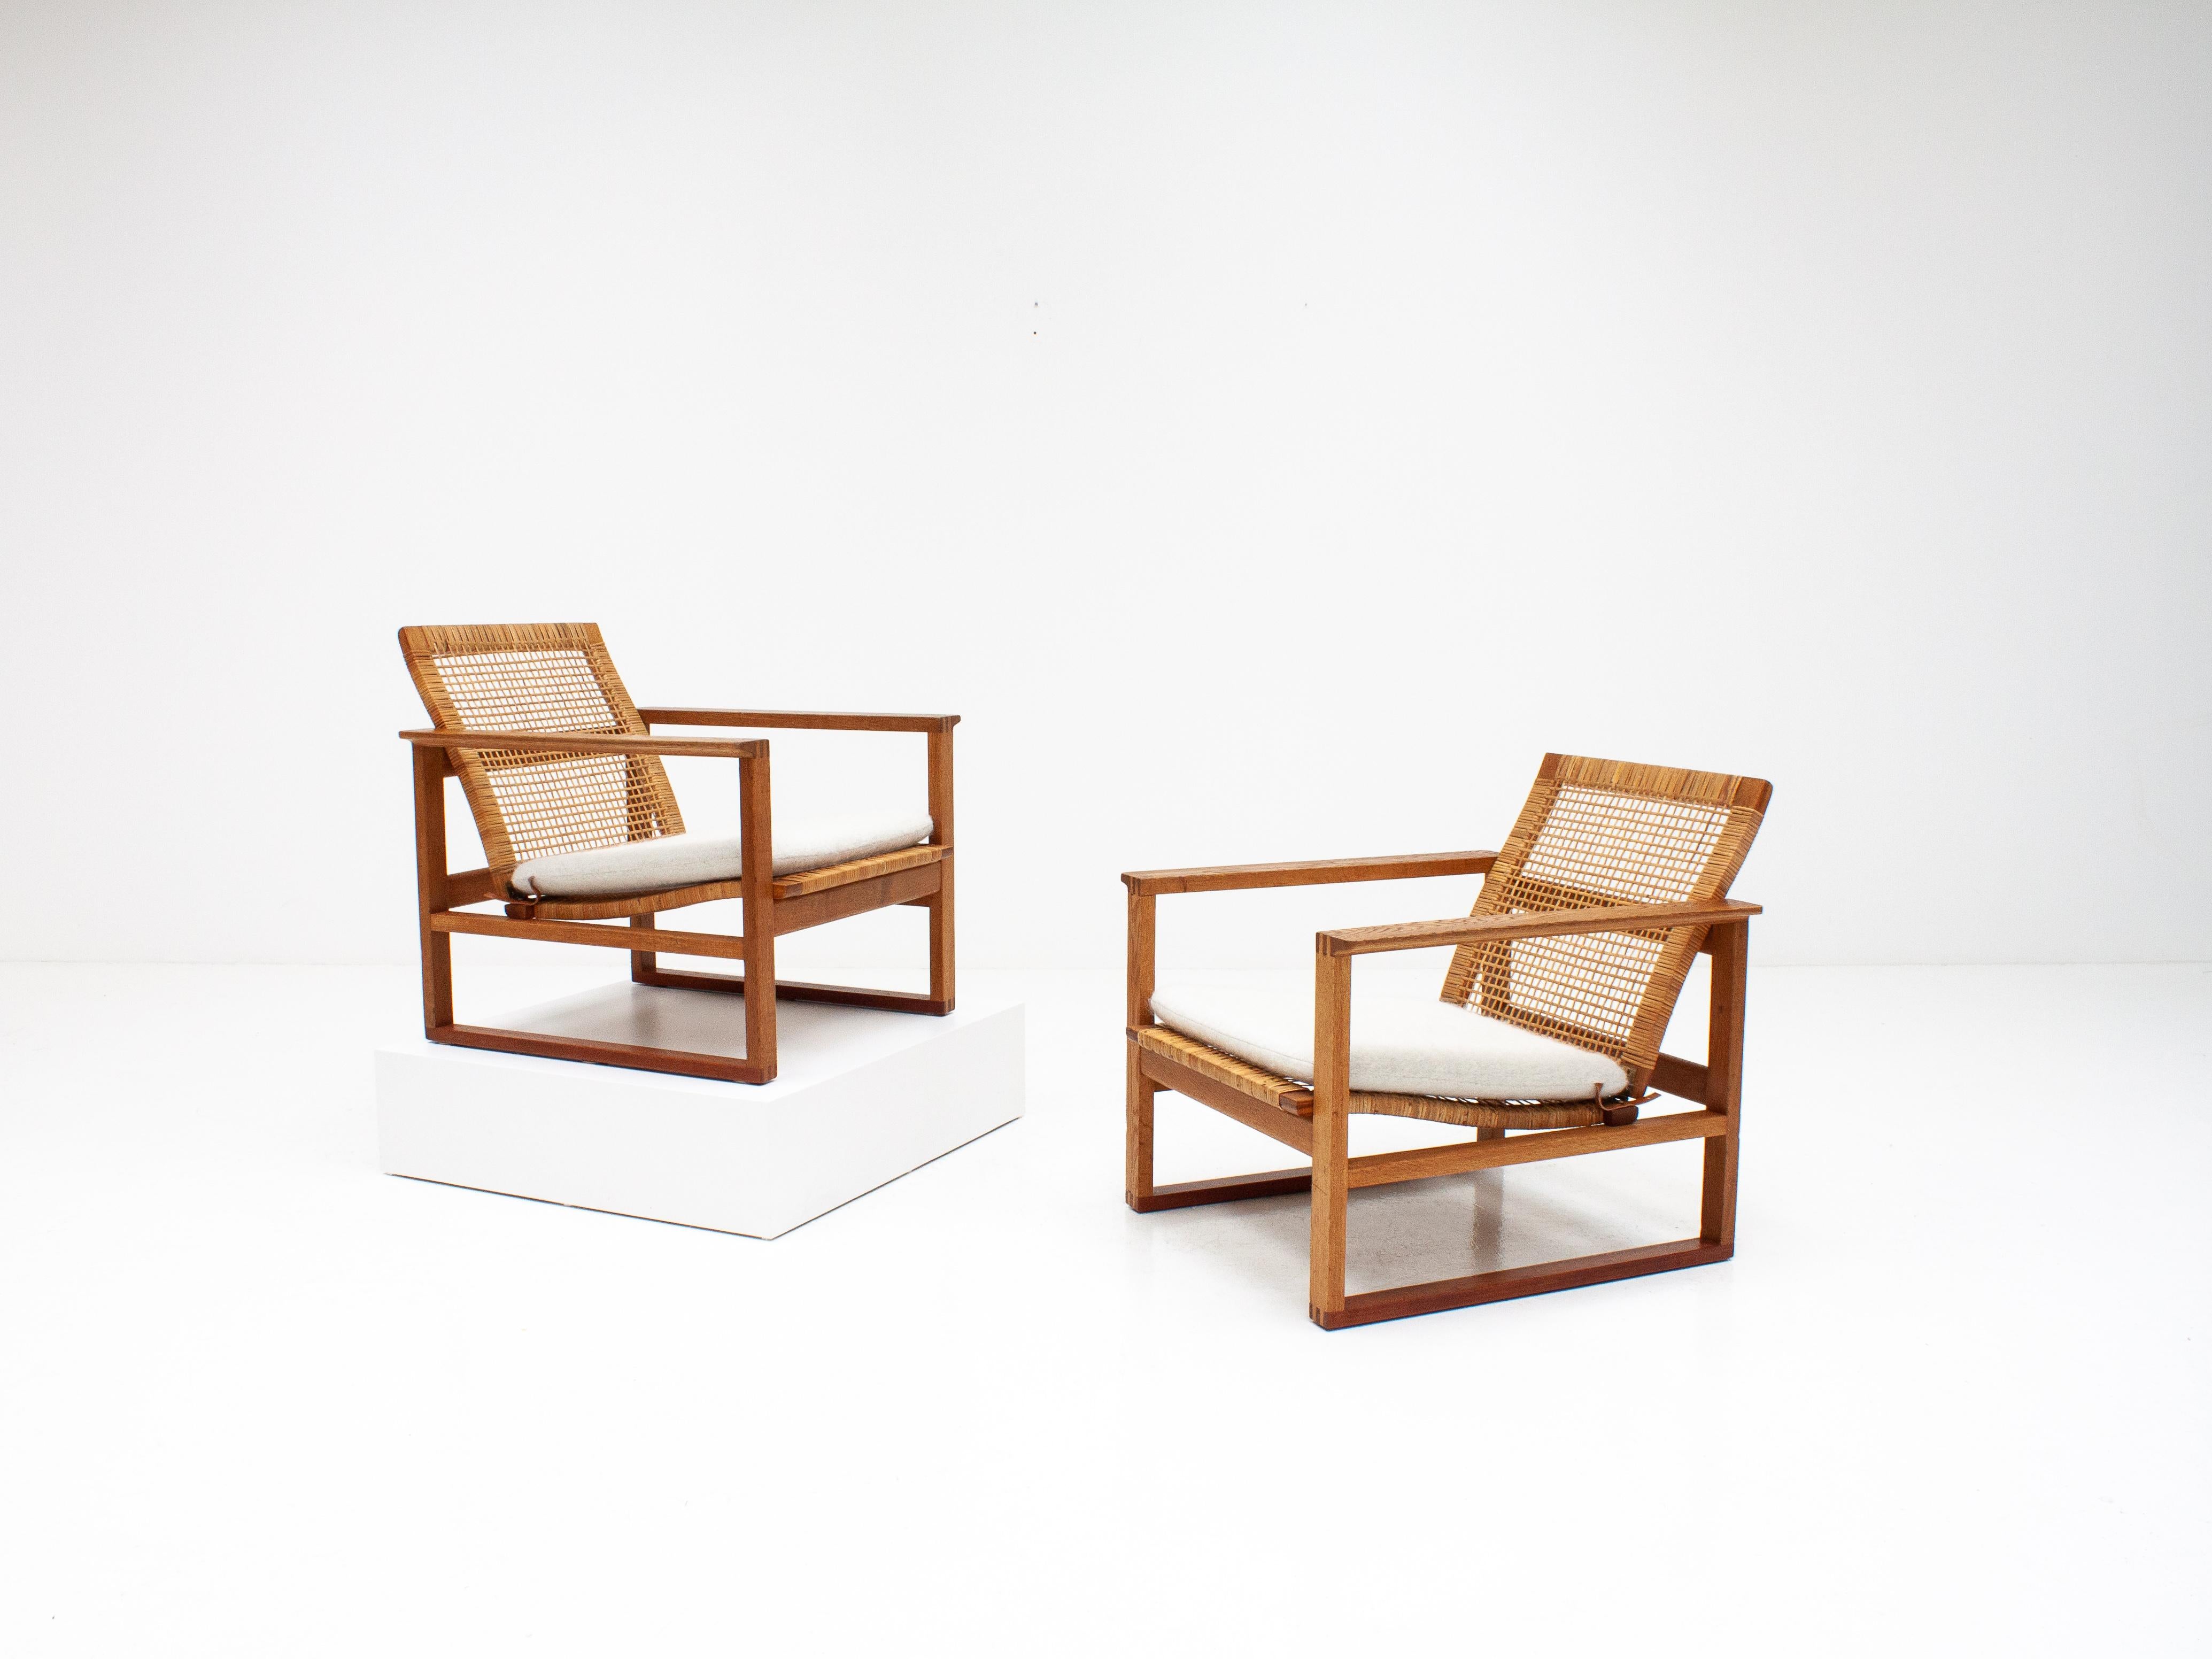 A pair of Børge Mogensen lounge chairs, in cane, designed in 1956, model number 2256 for Fredericia Stolefabrik. Pieces in cane are rare and are early production.

Consisting of cubical frames made of solid oak with finger joints. Newly